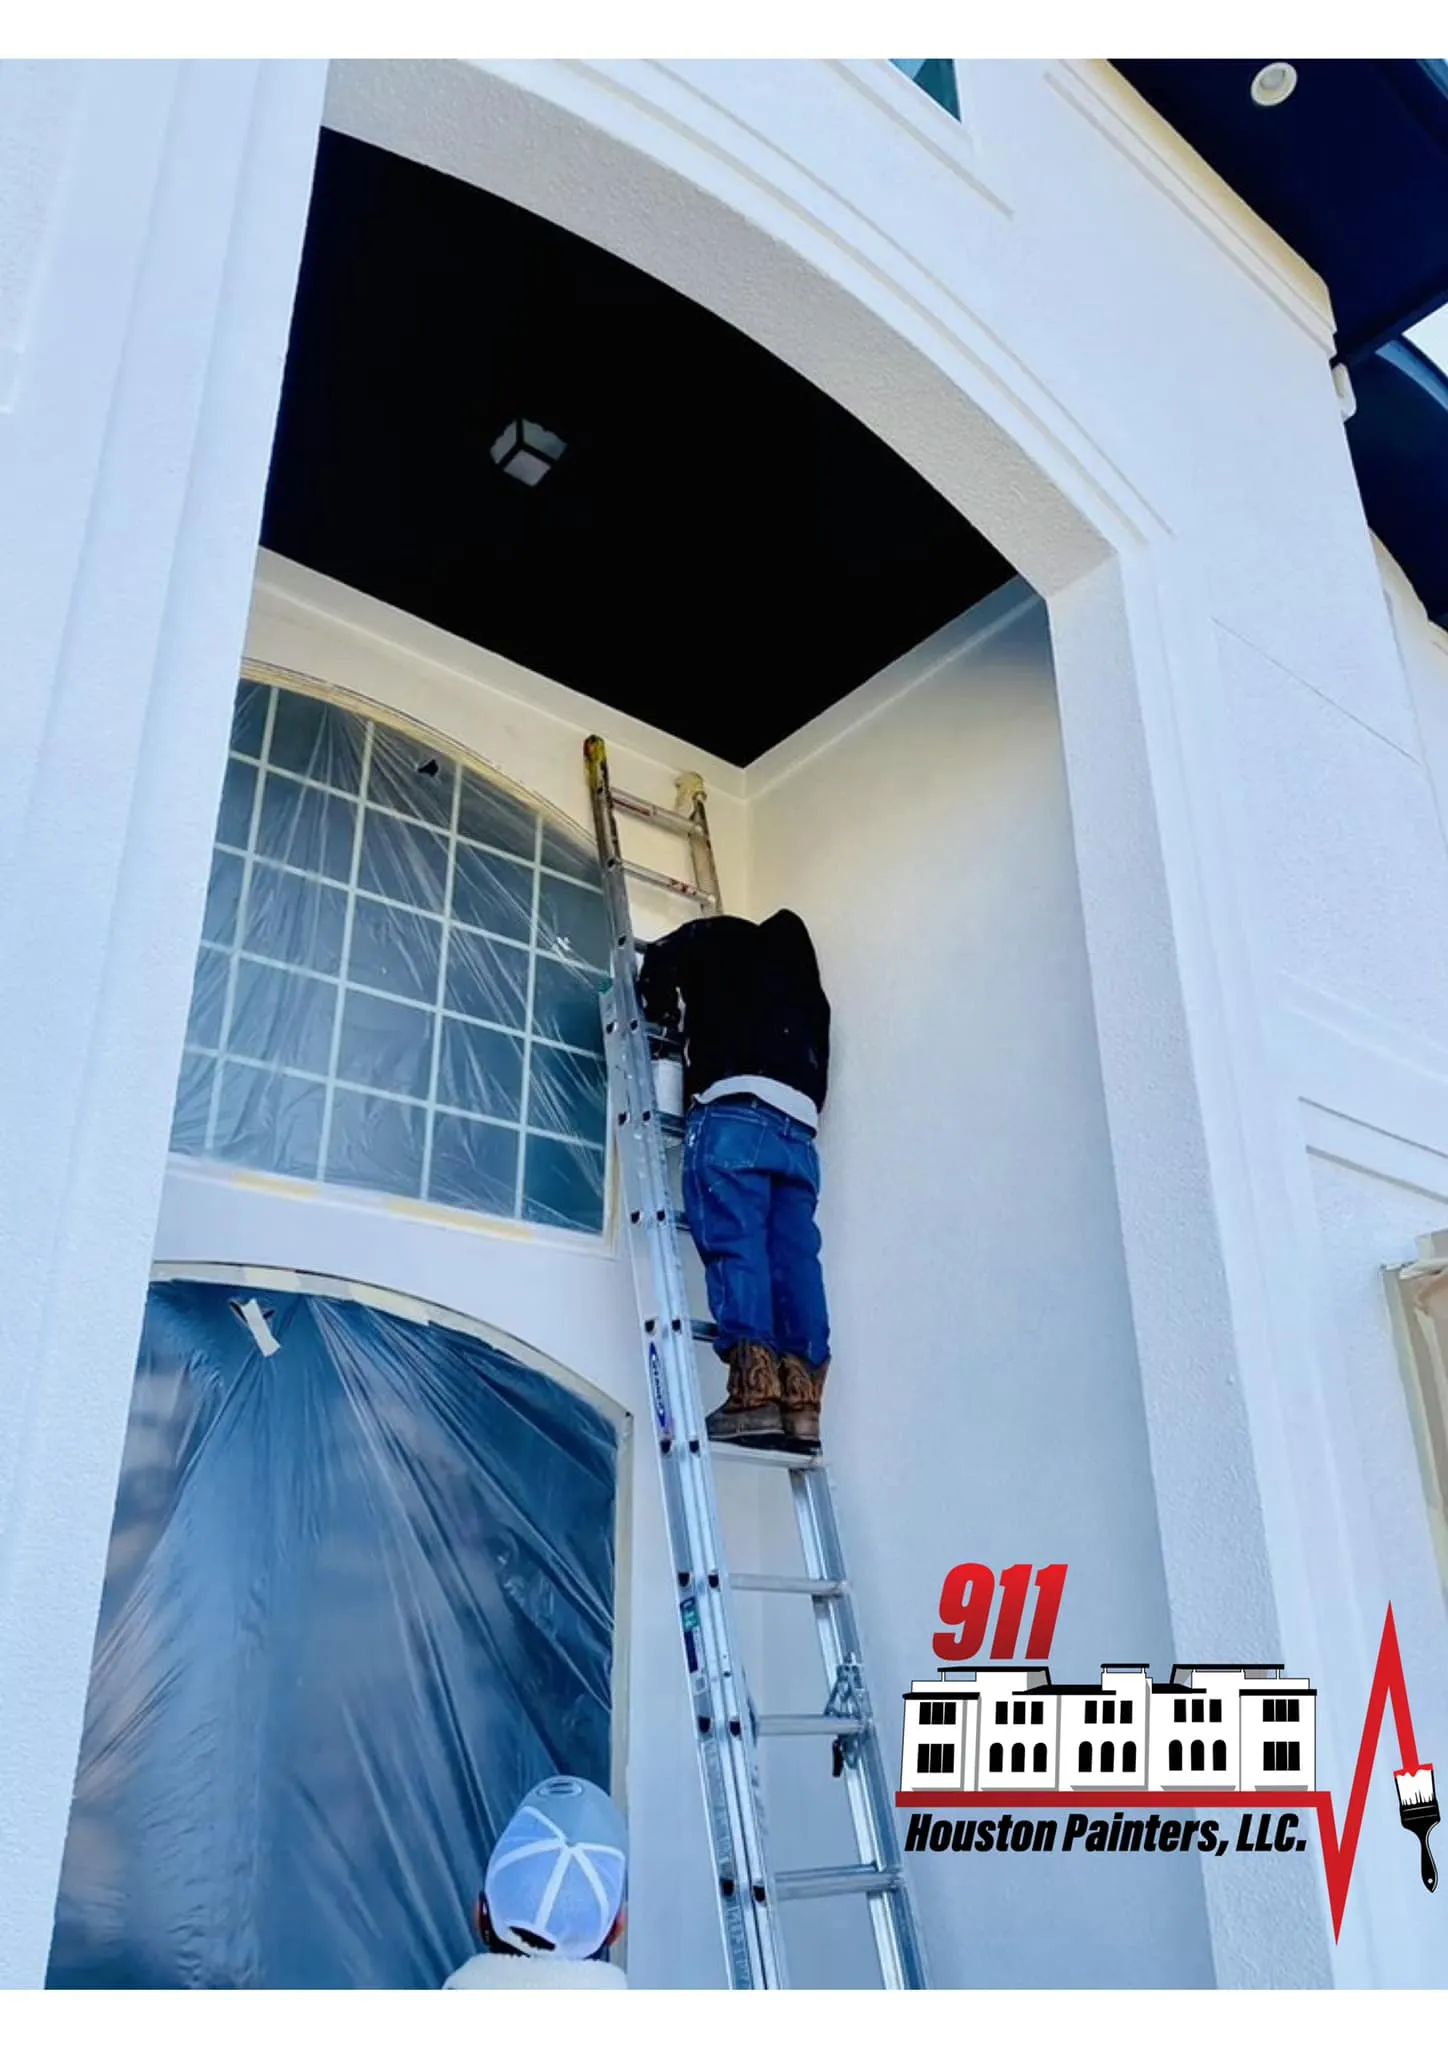 Commercial Painting for 911 Houston Painters, LLC in Houston, TX